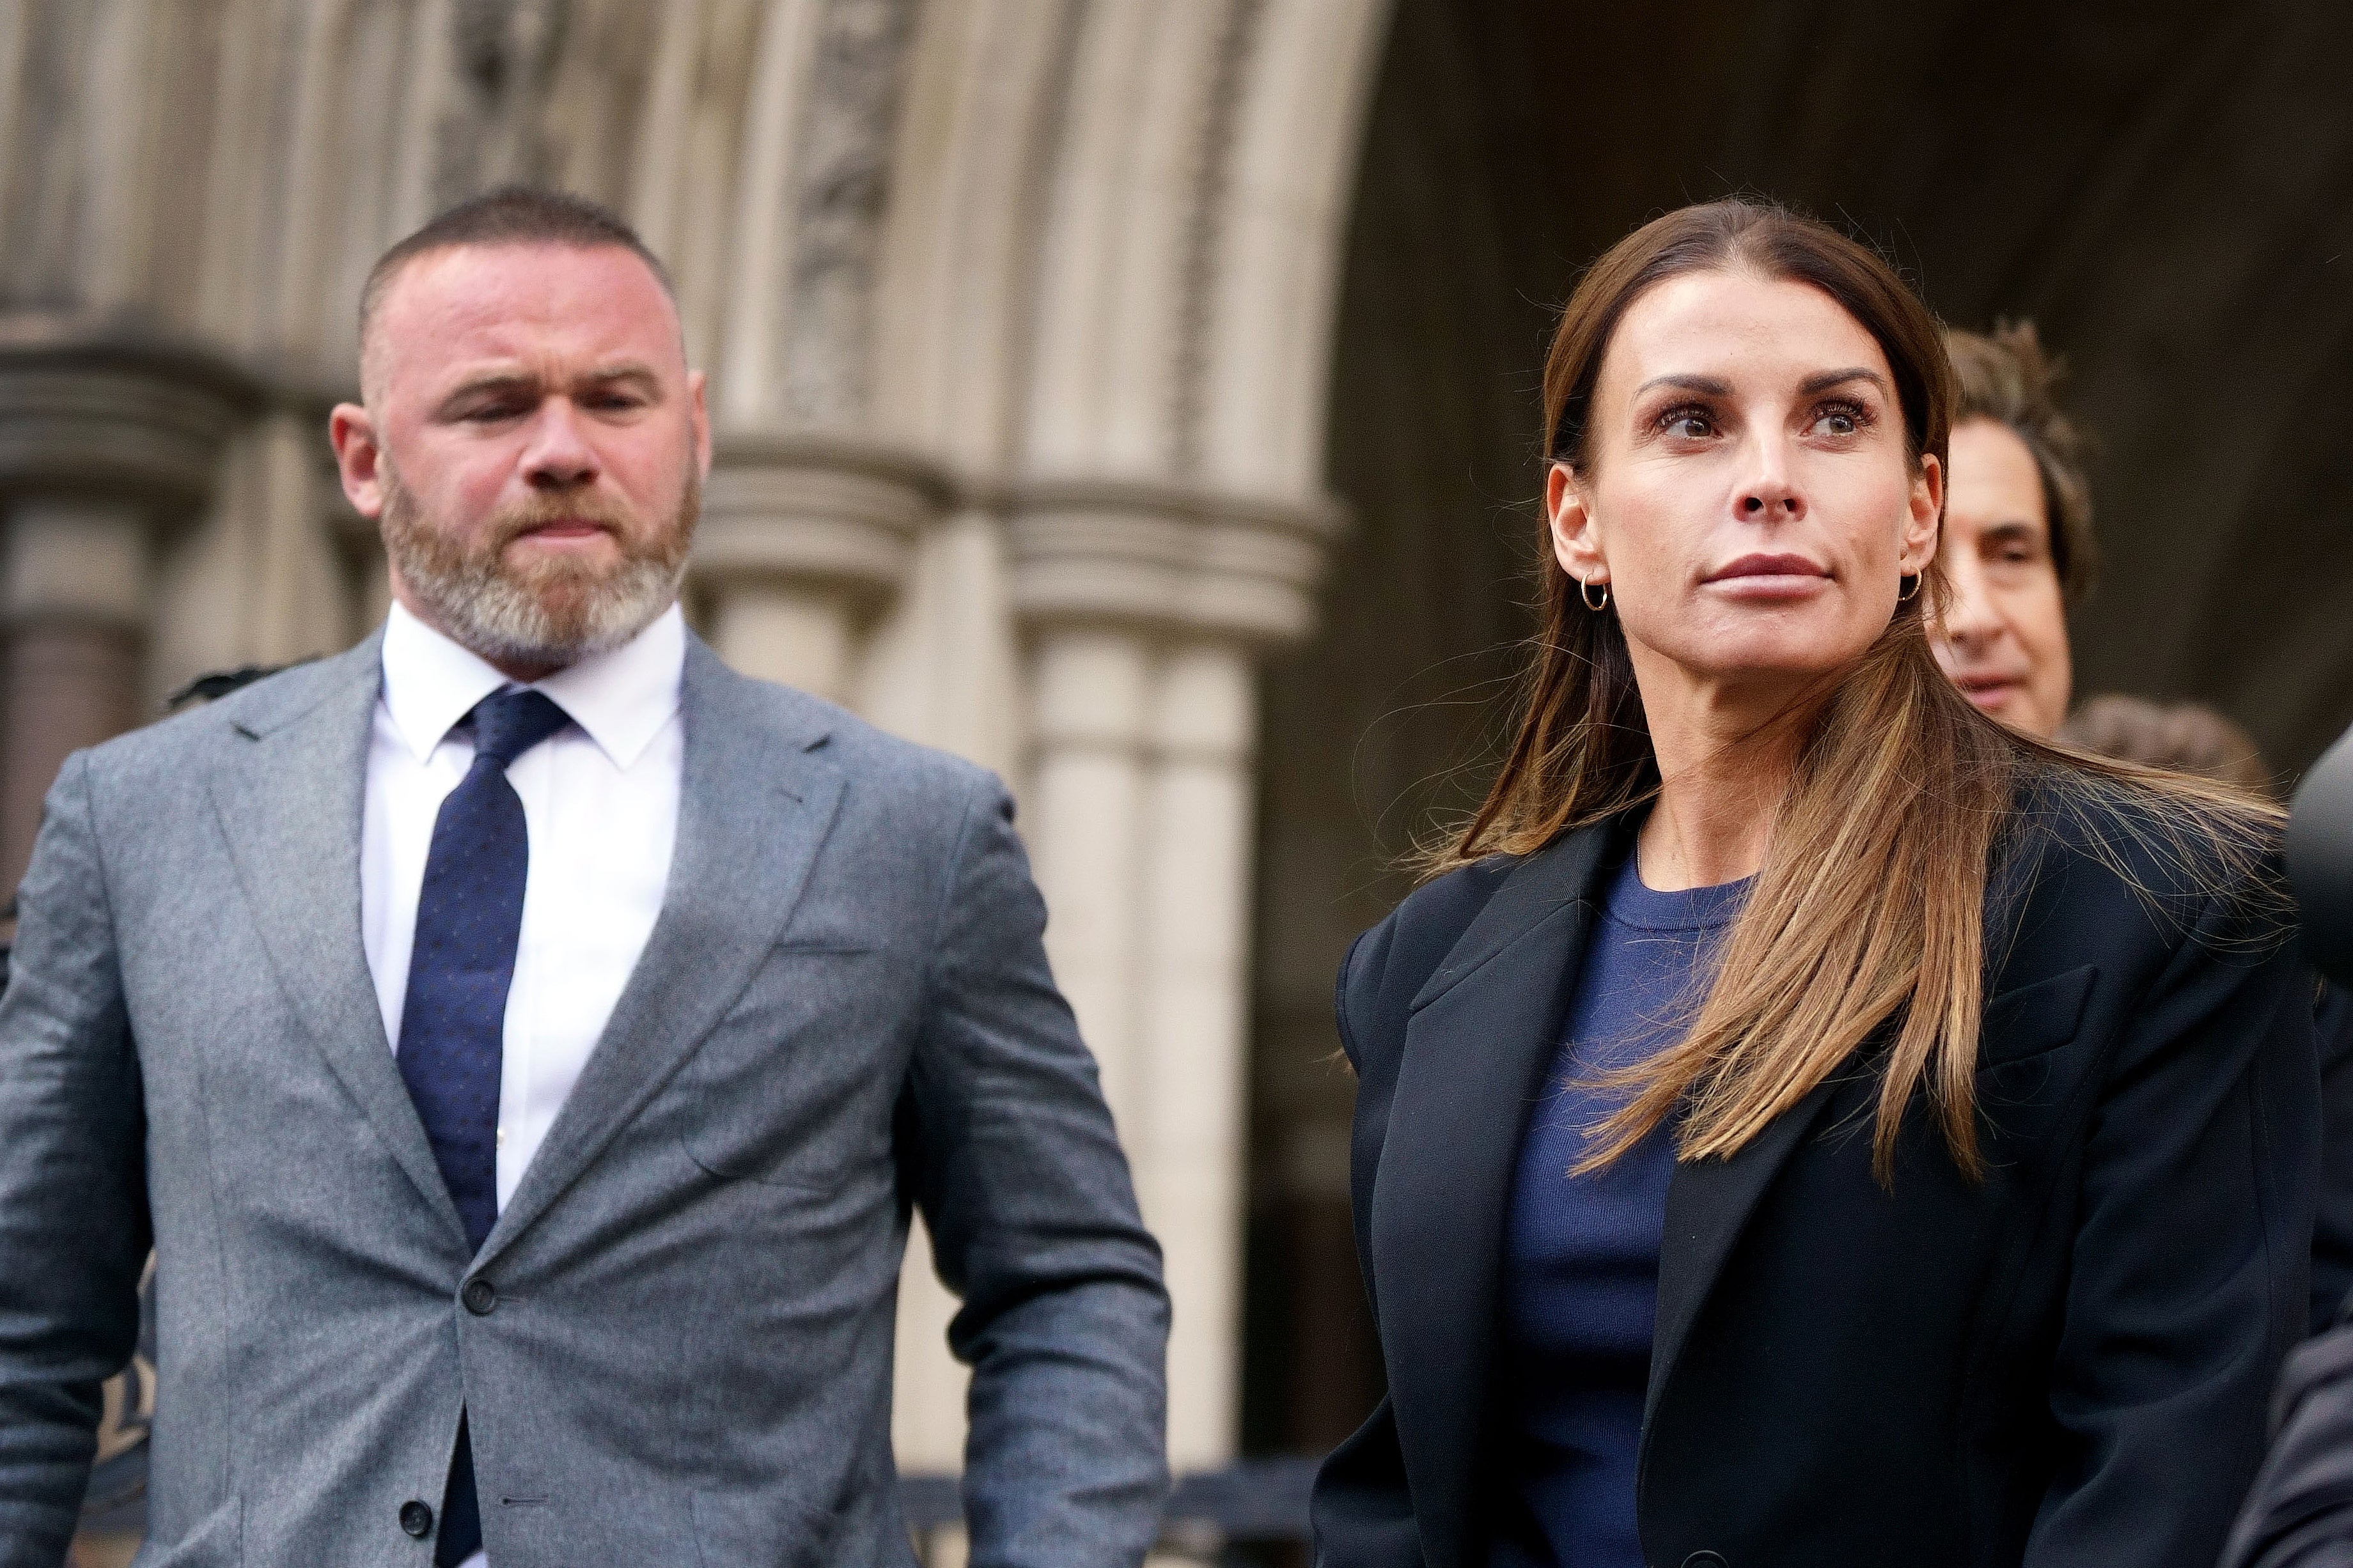 Wayne and Coleen Rooney will both give evidence later in the case